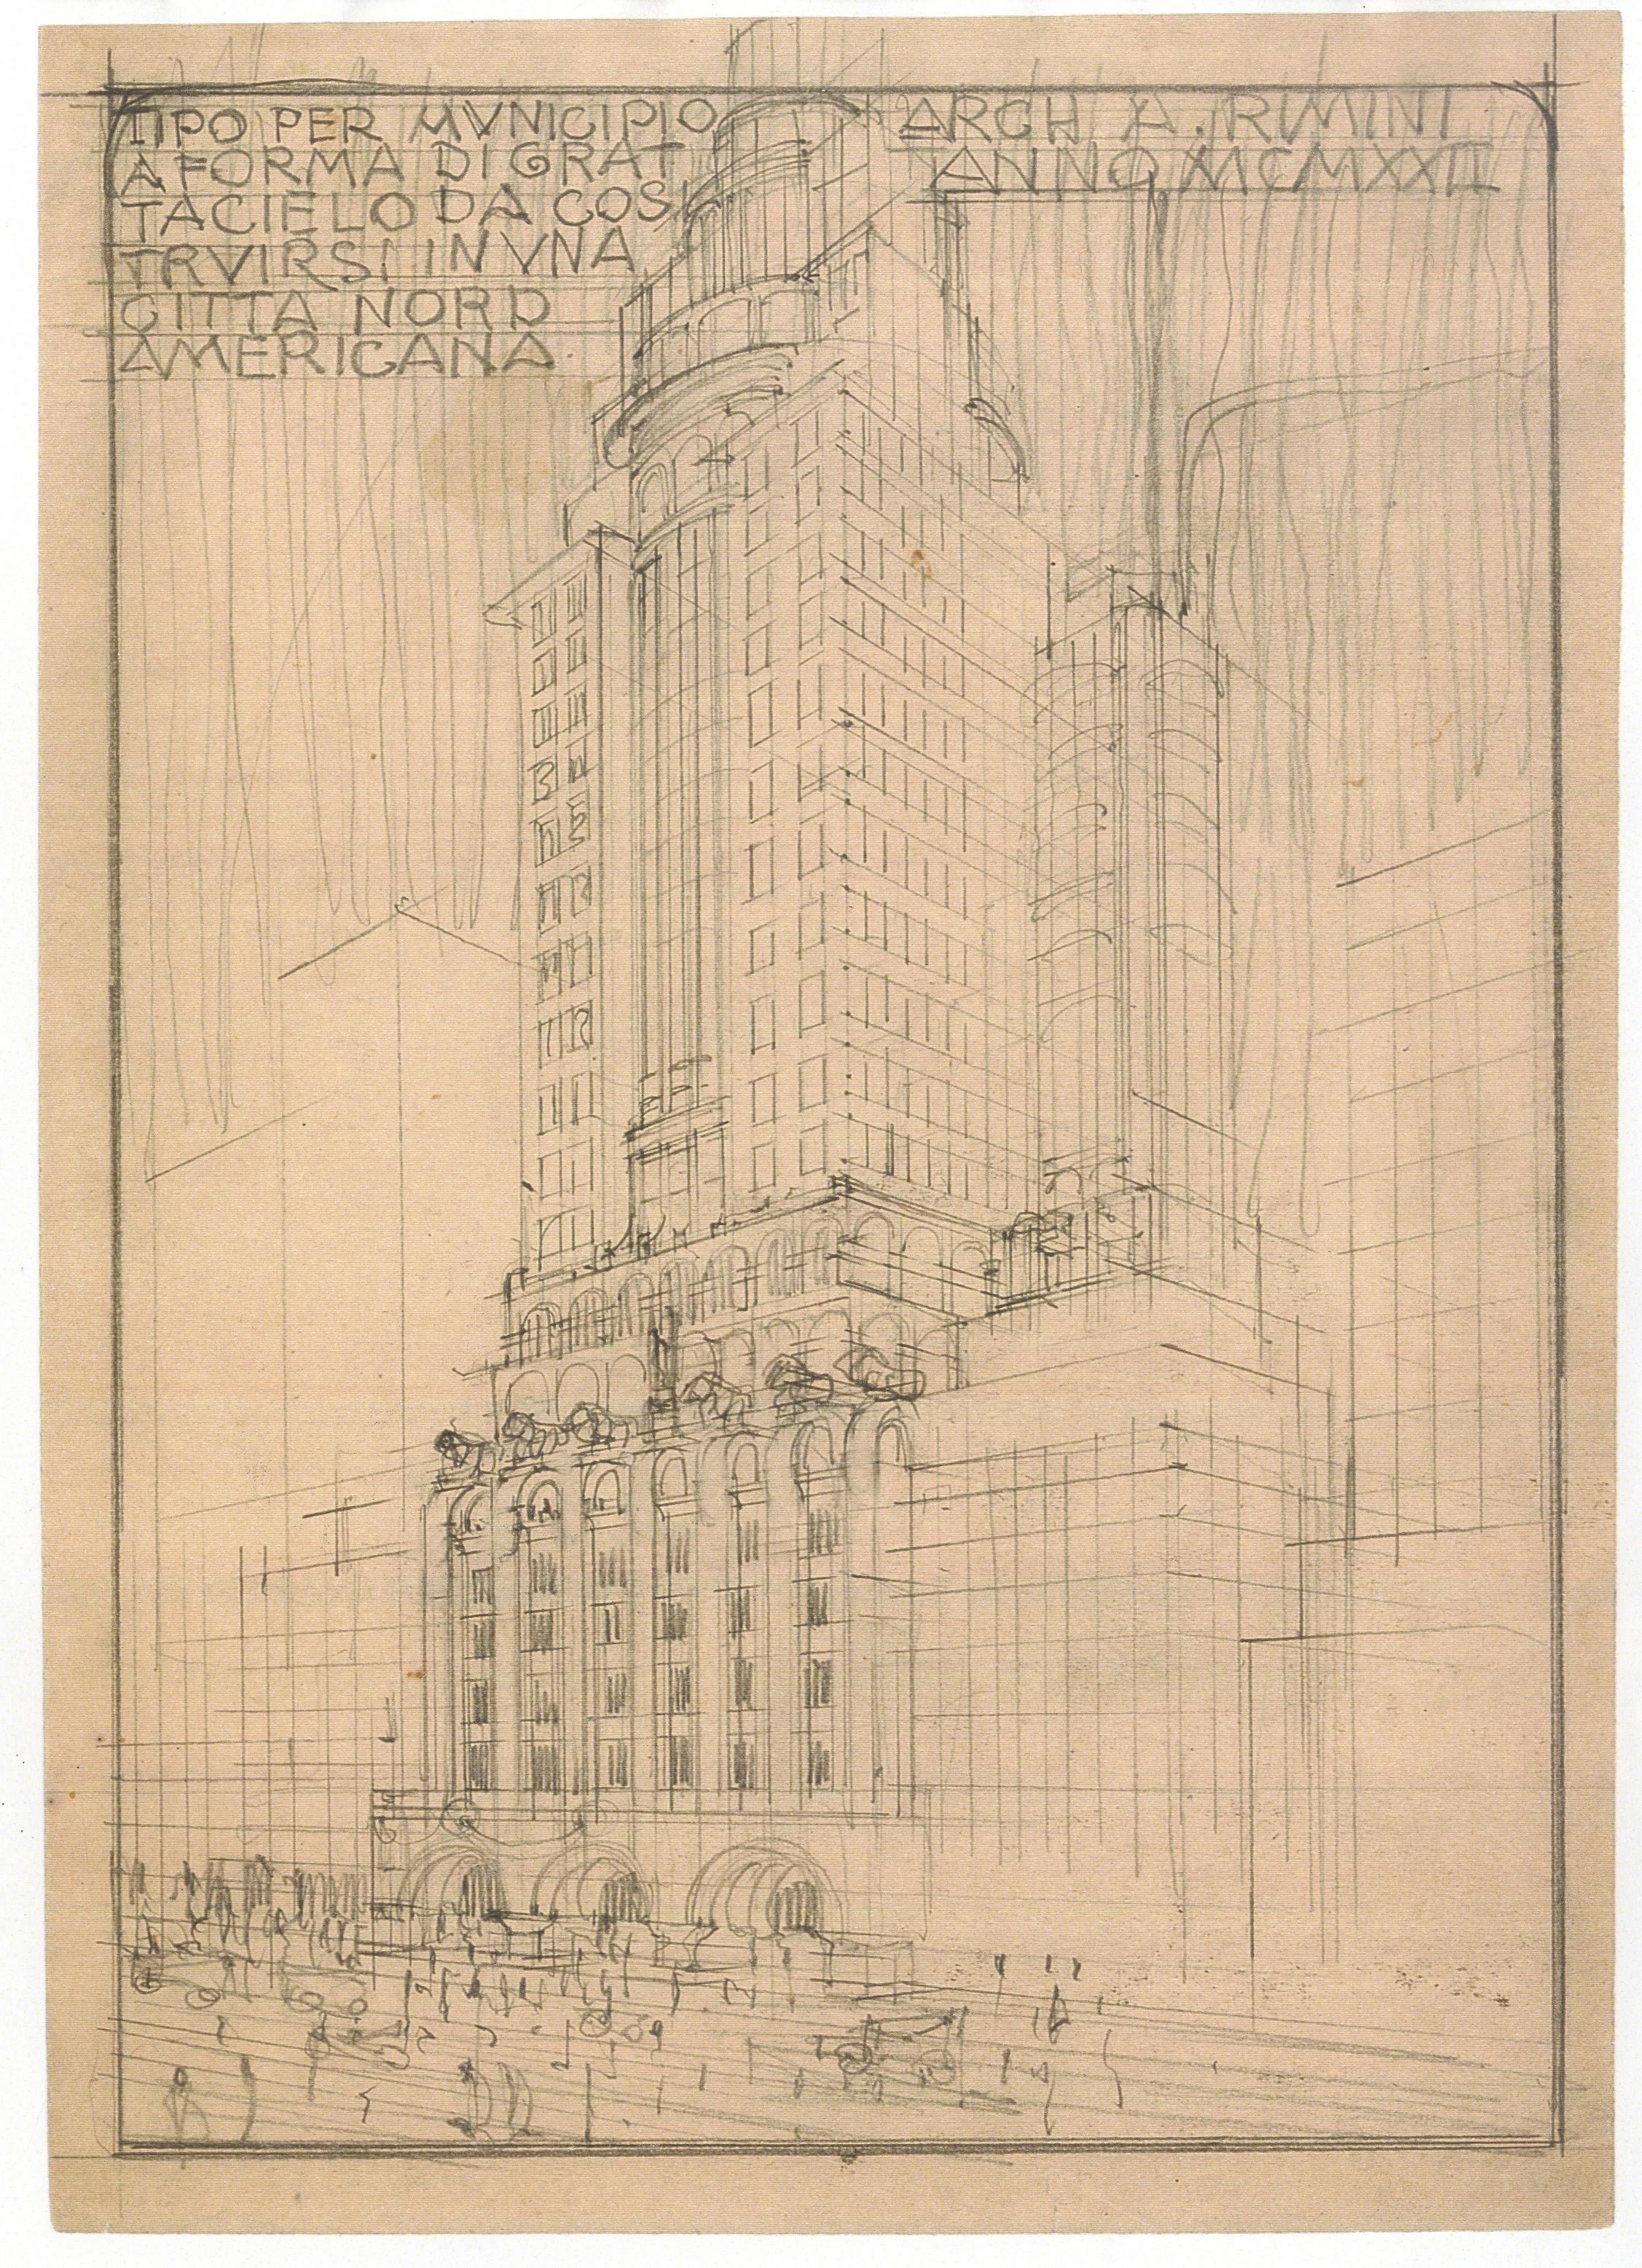 Alessandro Rimini, Type for a town hall in the shape of a skyscraper to be built in a North American city, 1922